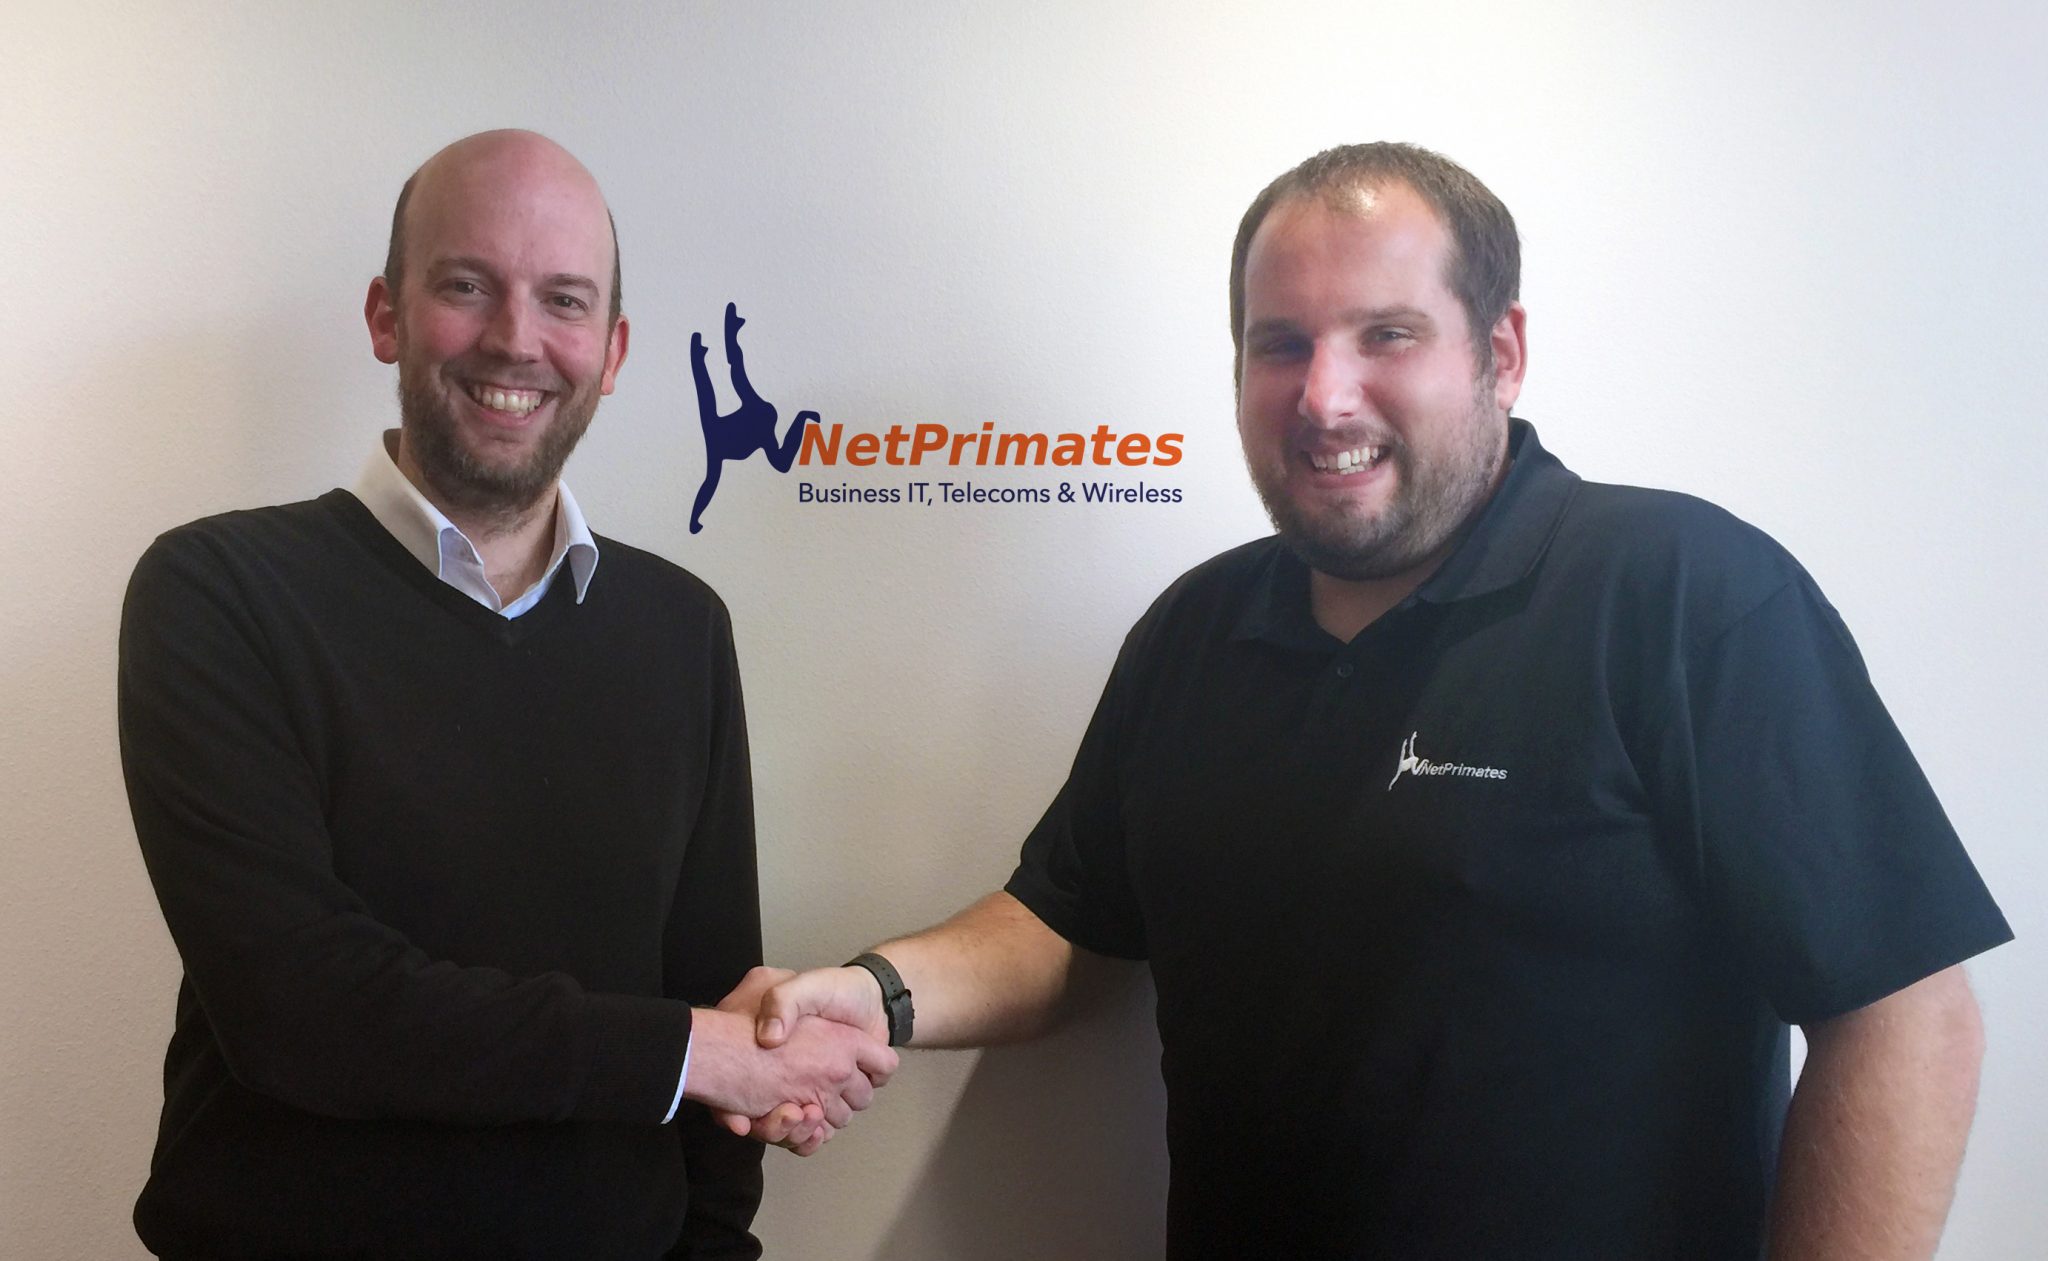 Net Primates welcomes IT specialists from Totton-based ITC